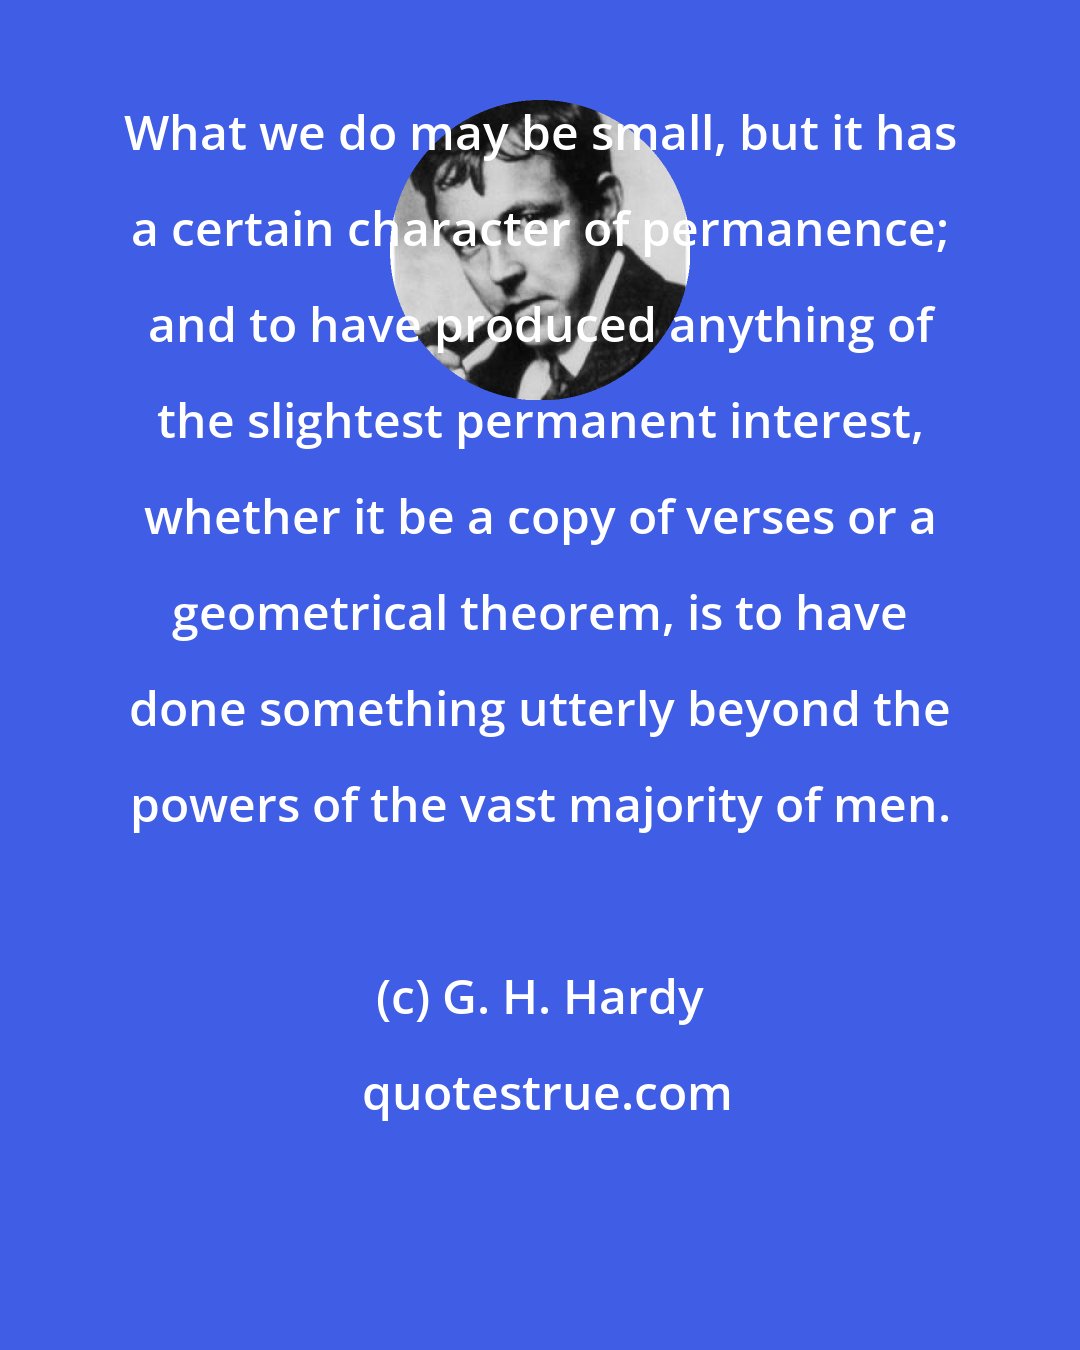 G. H. Hardy: What we do may be small, but it has a certain character of permanence; and to have produced anything of the slightest permanent interest, whether it be a copy of verses or a geometrical theorem, is to have done something utterly beyond the powers of the vast majority of men.